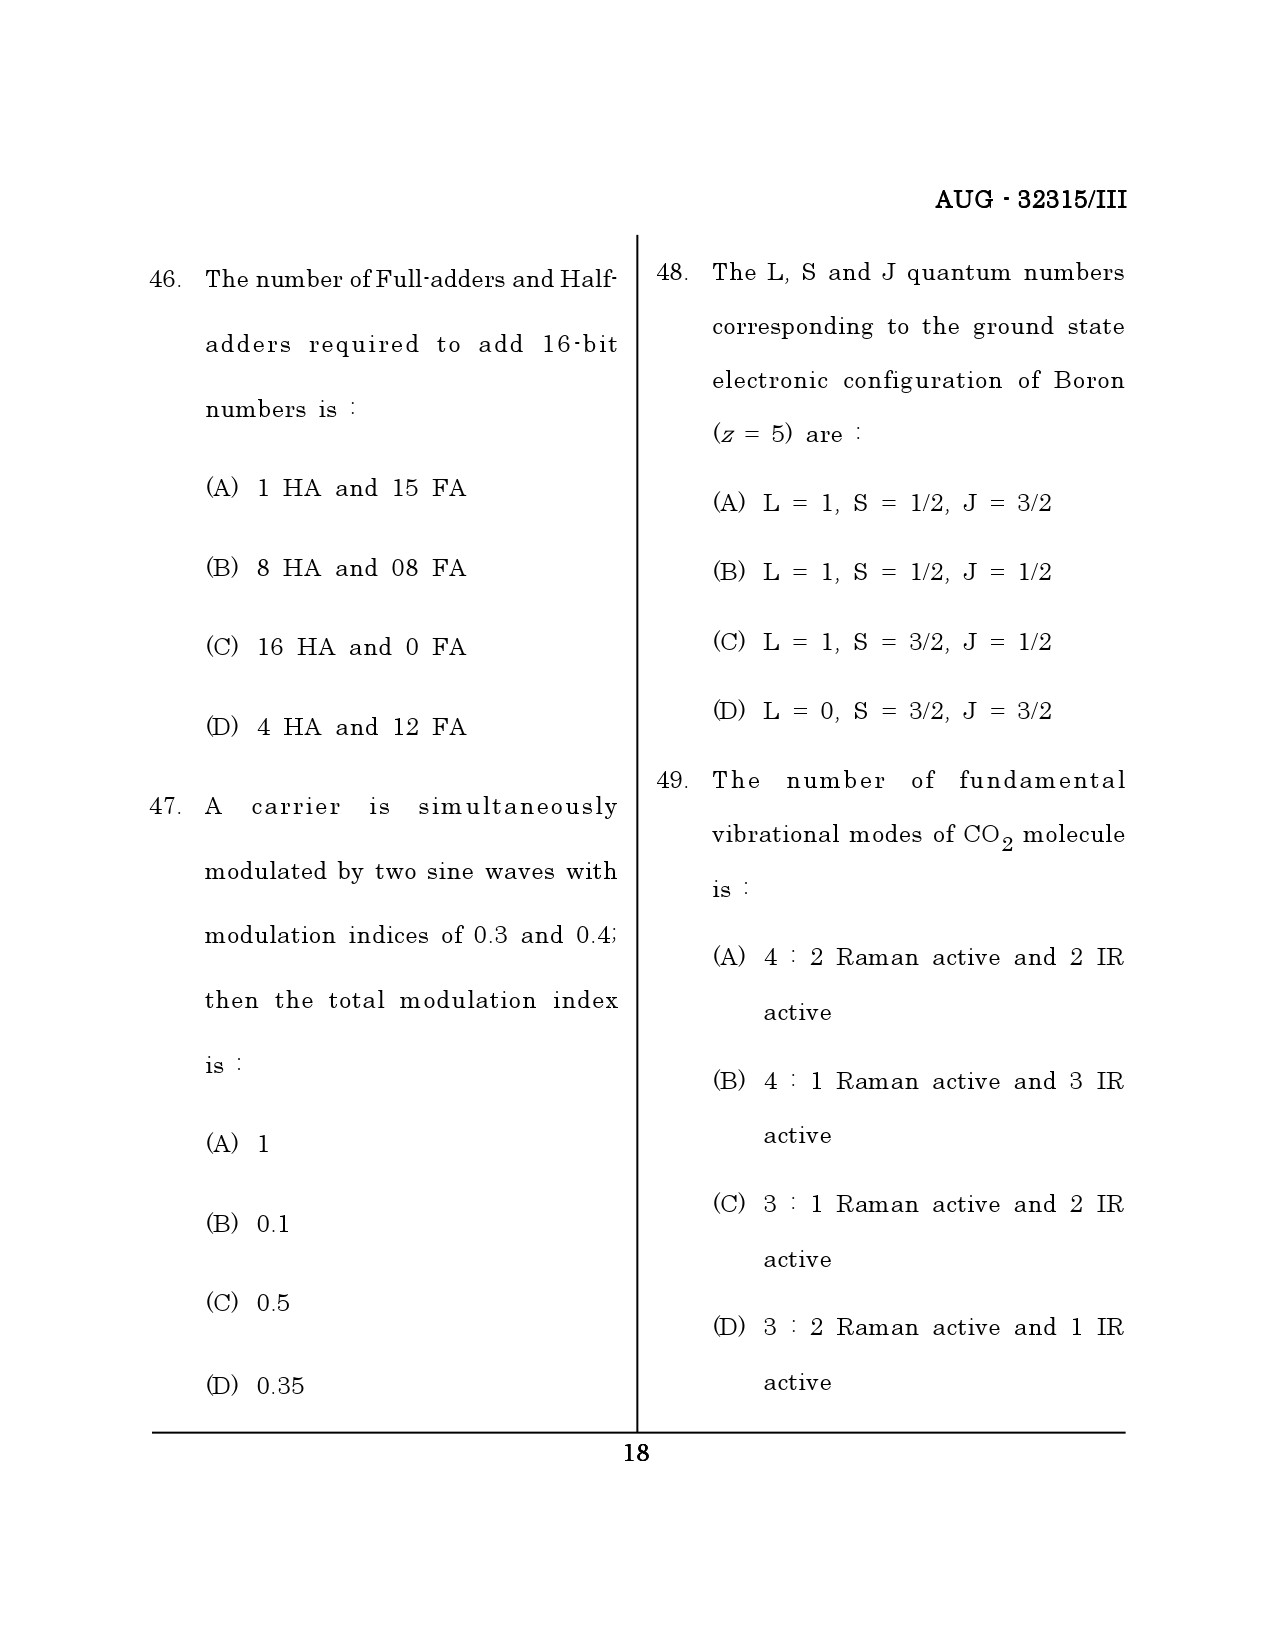 Maharashtra SET Physical Science Question Paper III August 2015 17